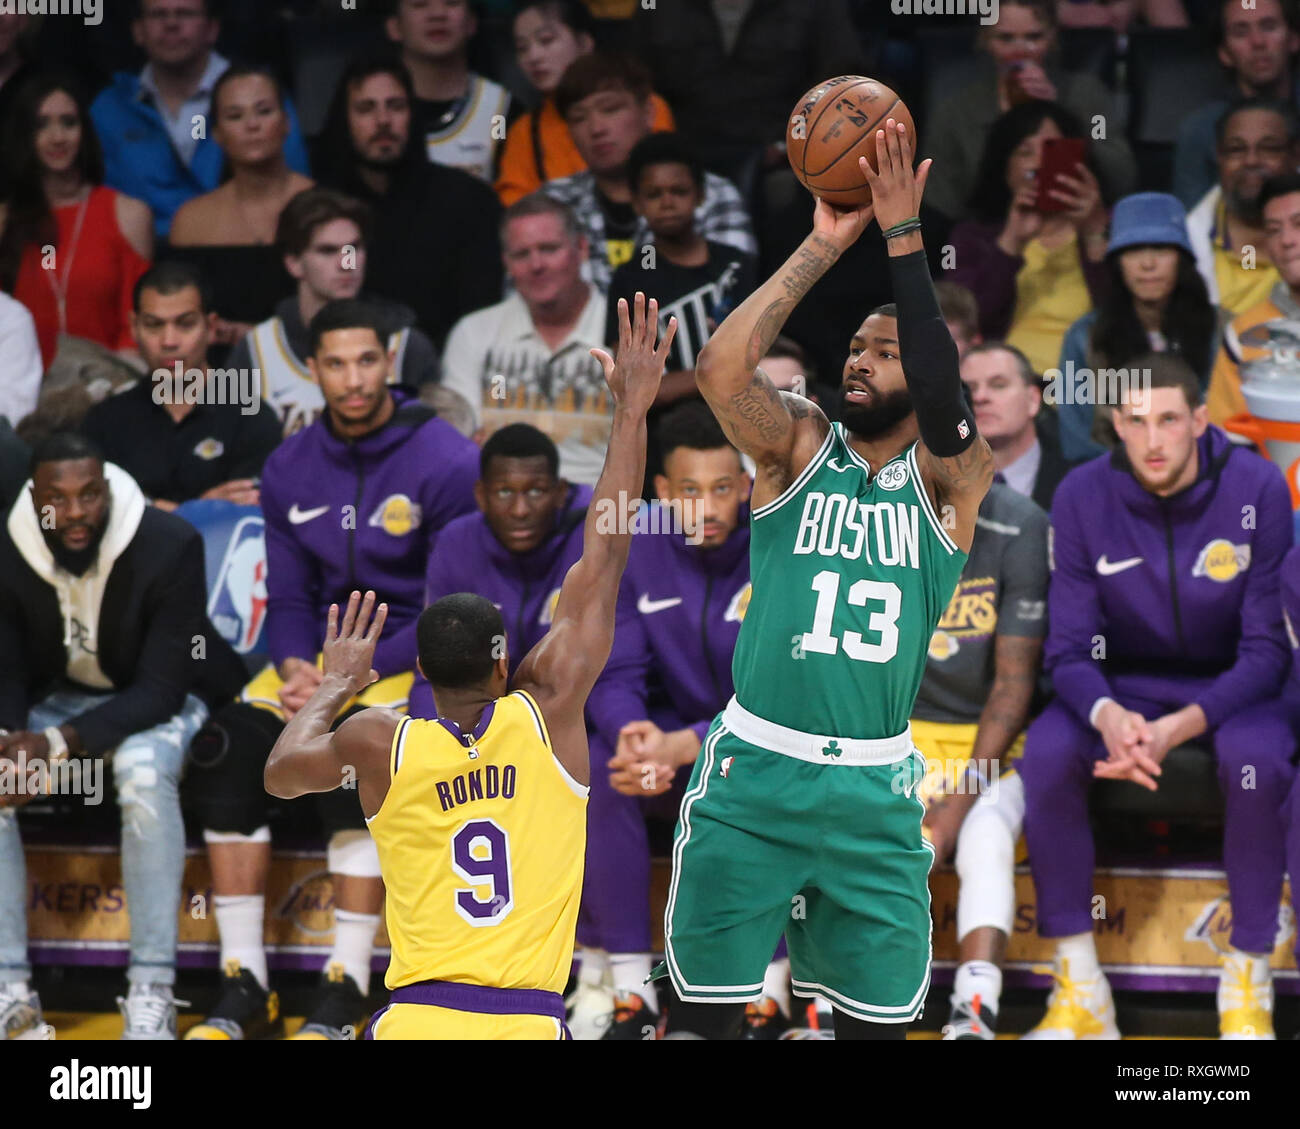 Boston Celtics forward Marcus Morris #13 shoots during the Boston Celtics vs Los Angeles Lakers game at Staples Center in Los Angeles, CA on March 09, 2019. (Photo by Jevone Moore) Stock Photo